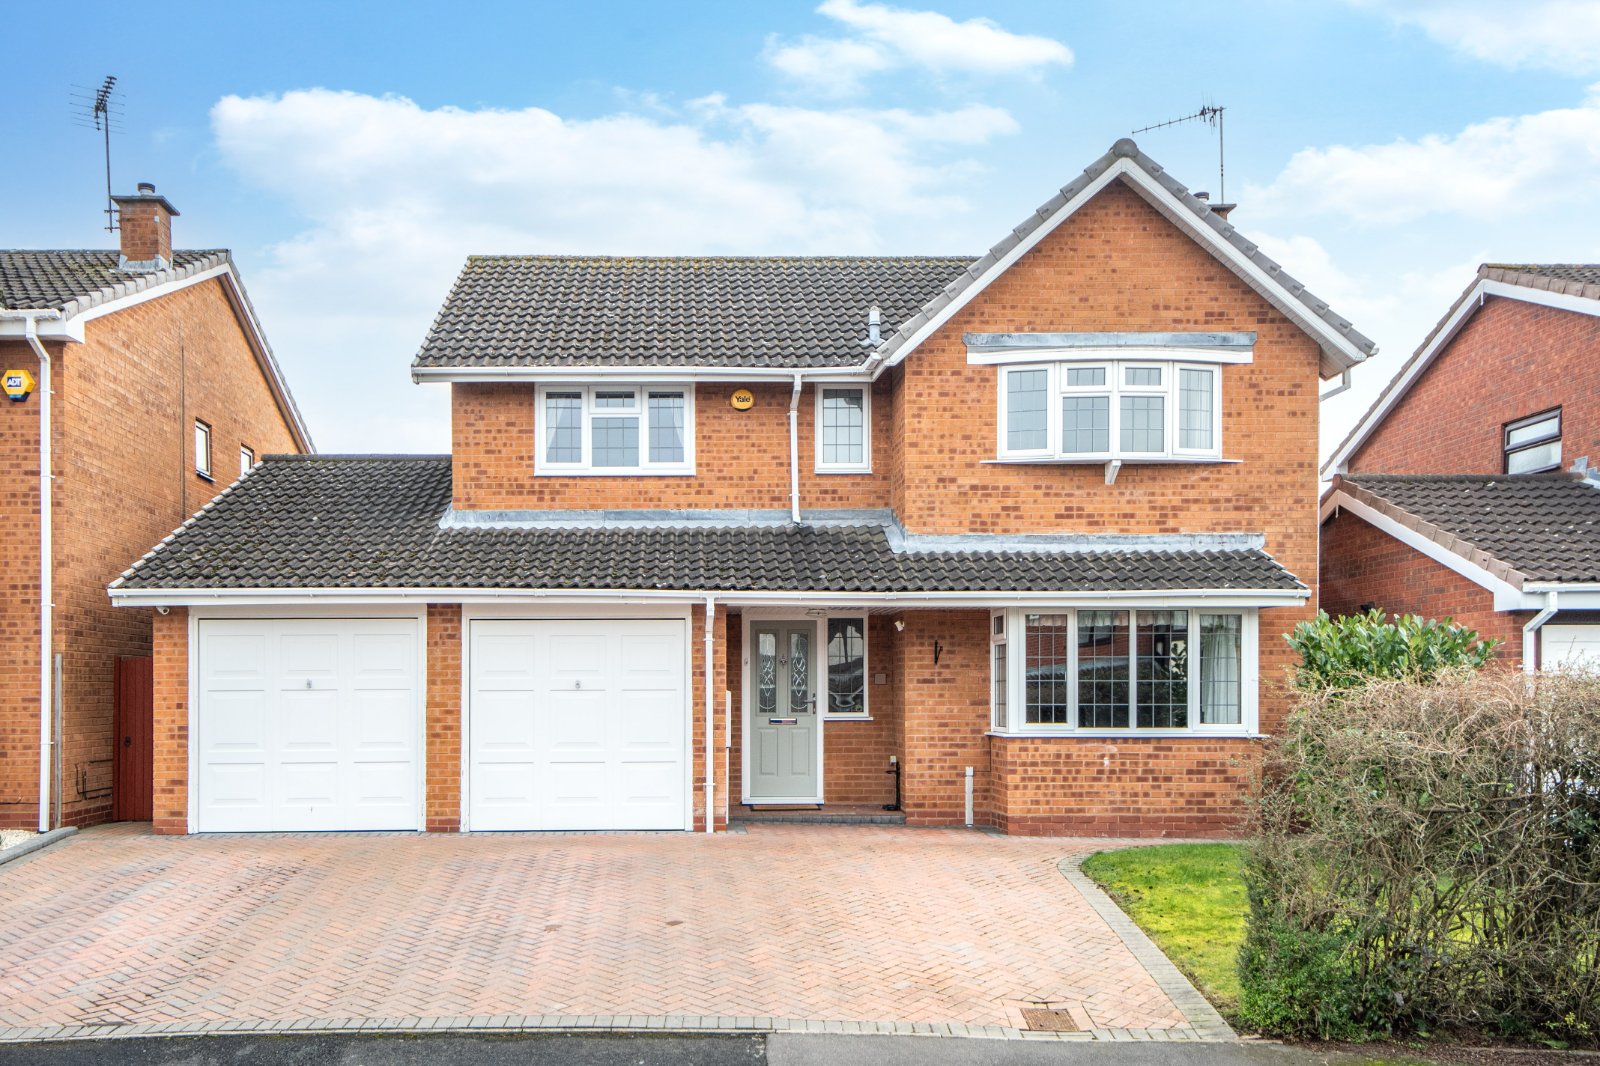 4 bed house for sale in Fircroft Close, Stoke Heath - Property Image 1